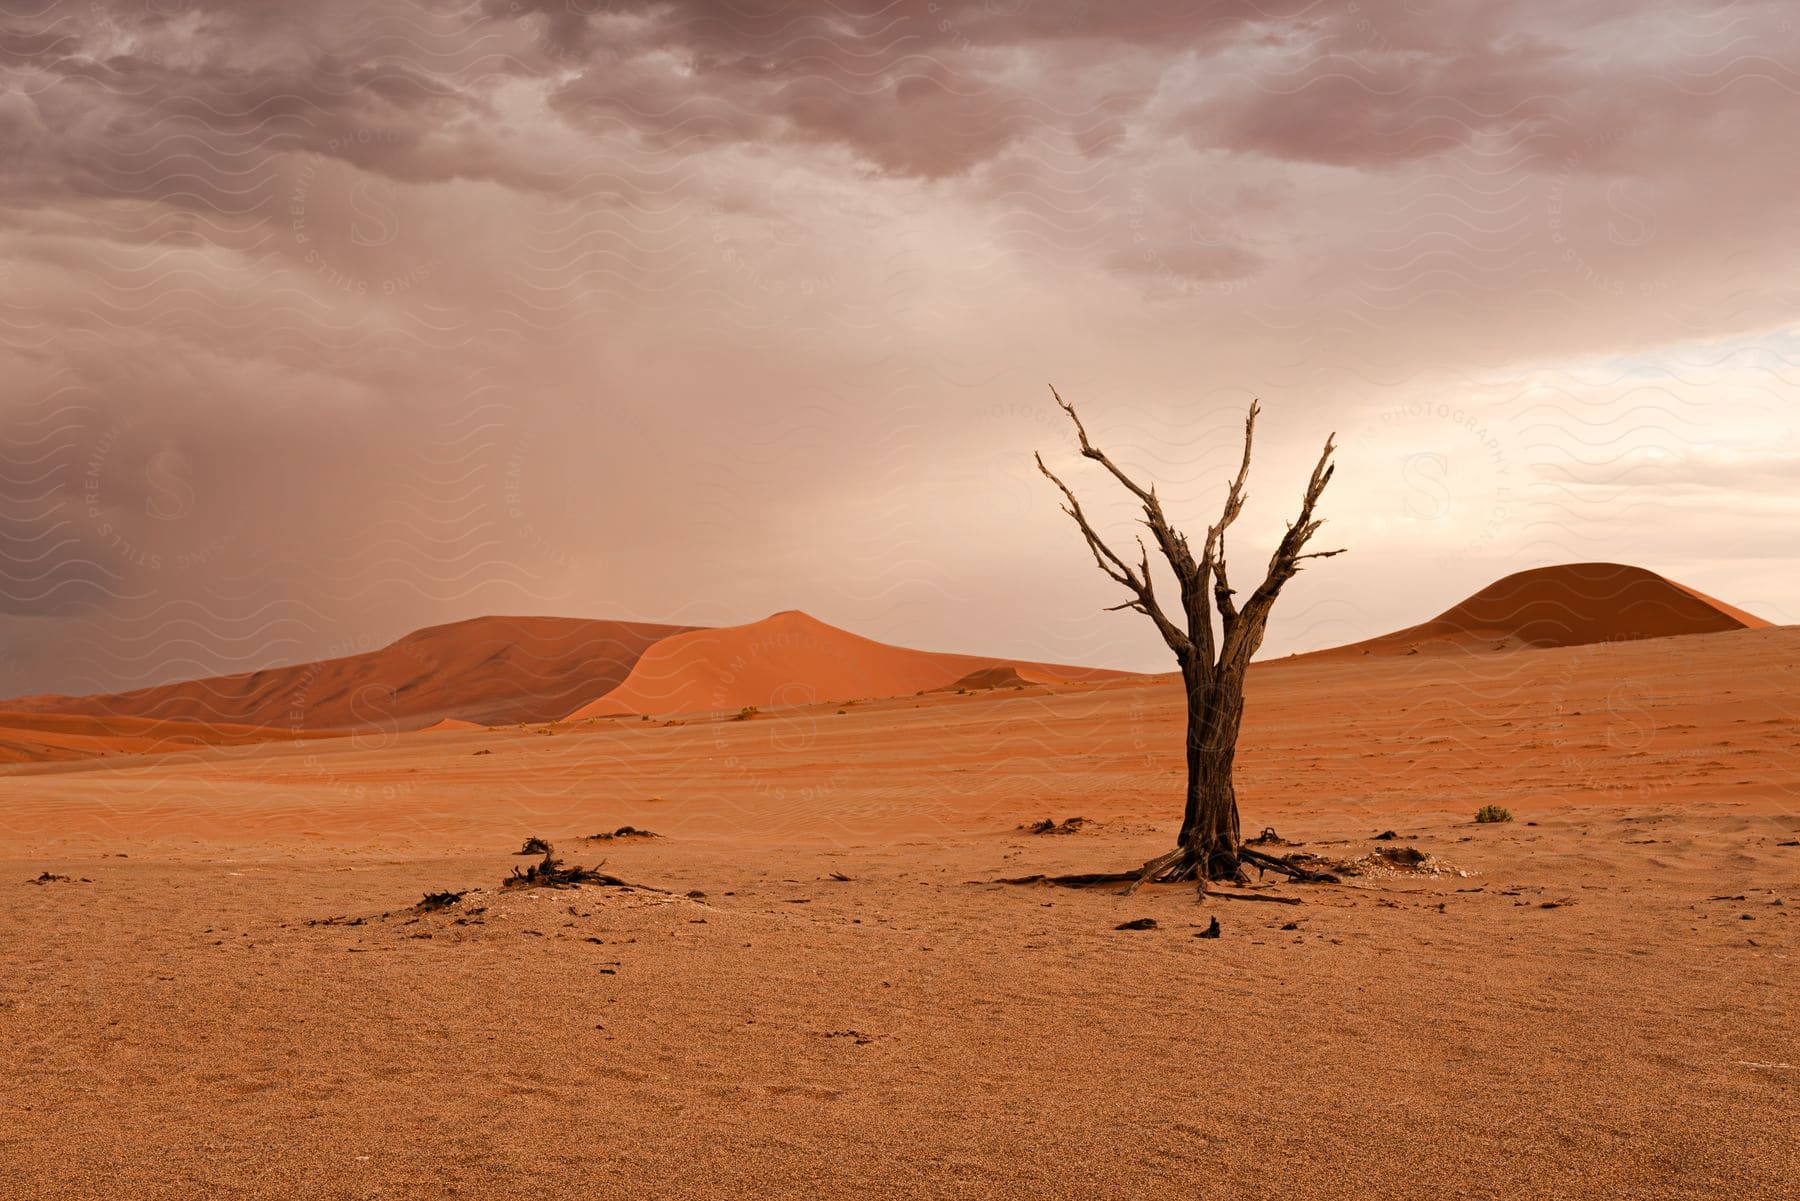 A desert scene with a lone dead tree and orange colored sand dunes and sand under a cloudy sky.